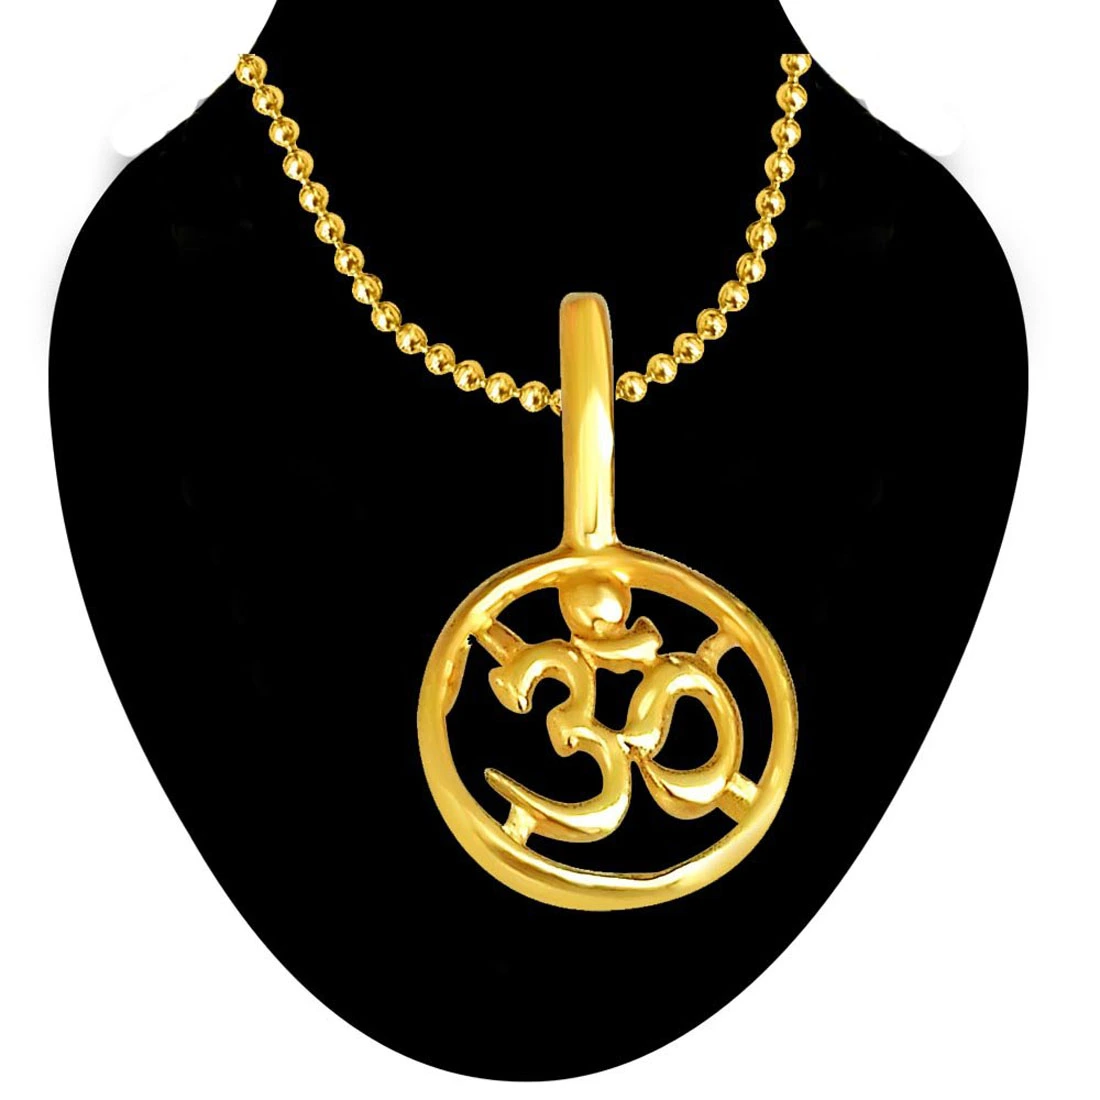 OM Shaped Gold Plated Pendant in Sterling Silver with Gold Plated 22 IN Chain (SDS191)